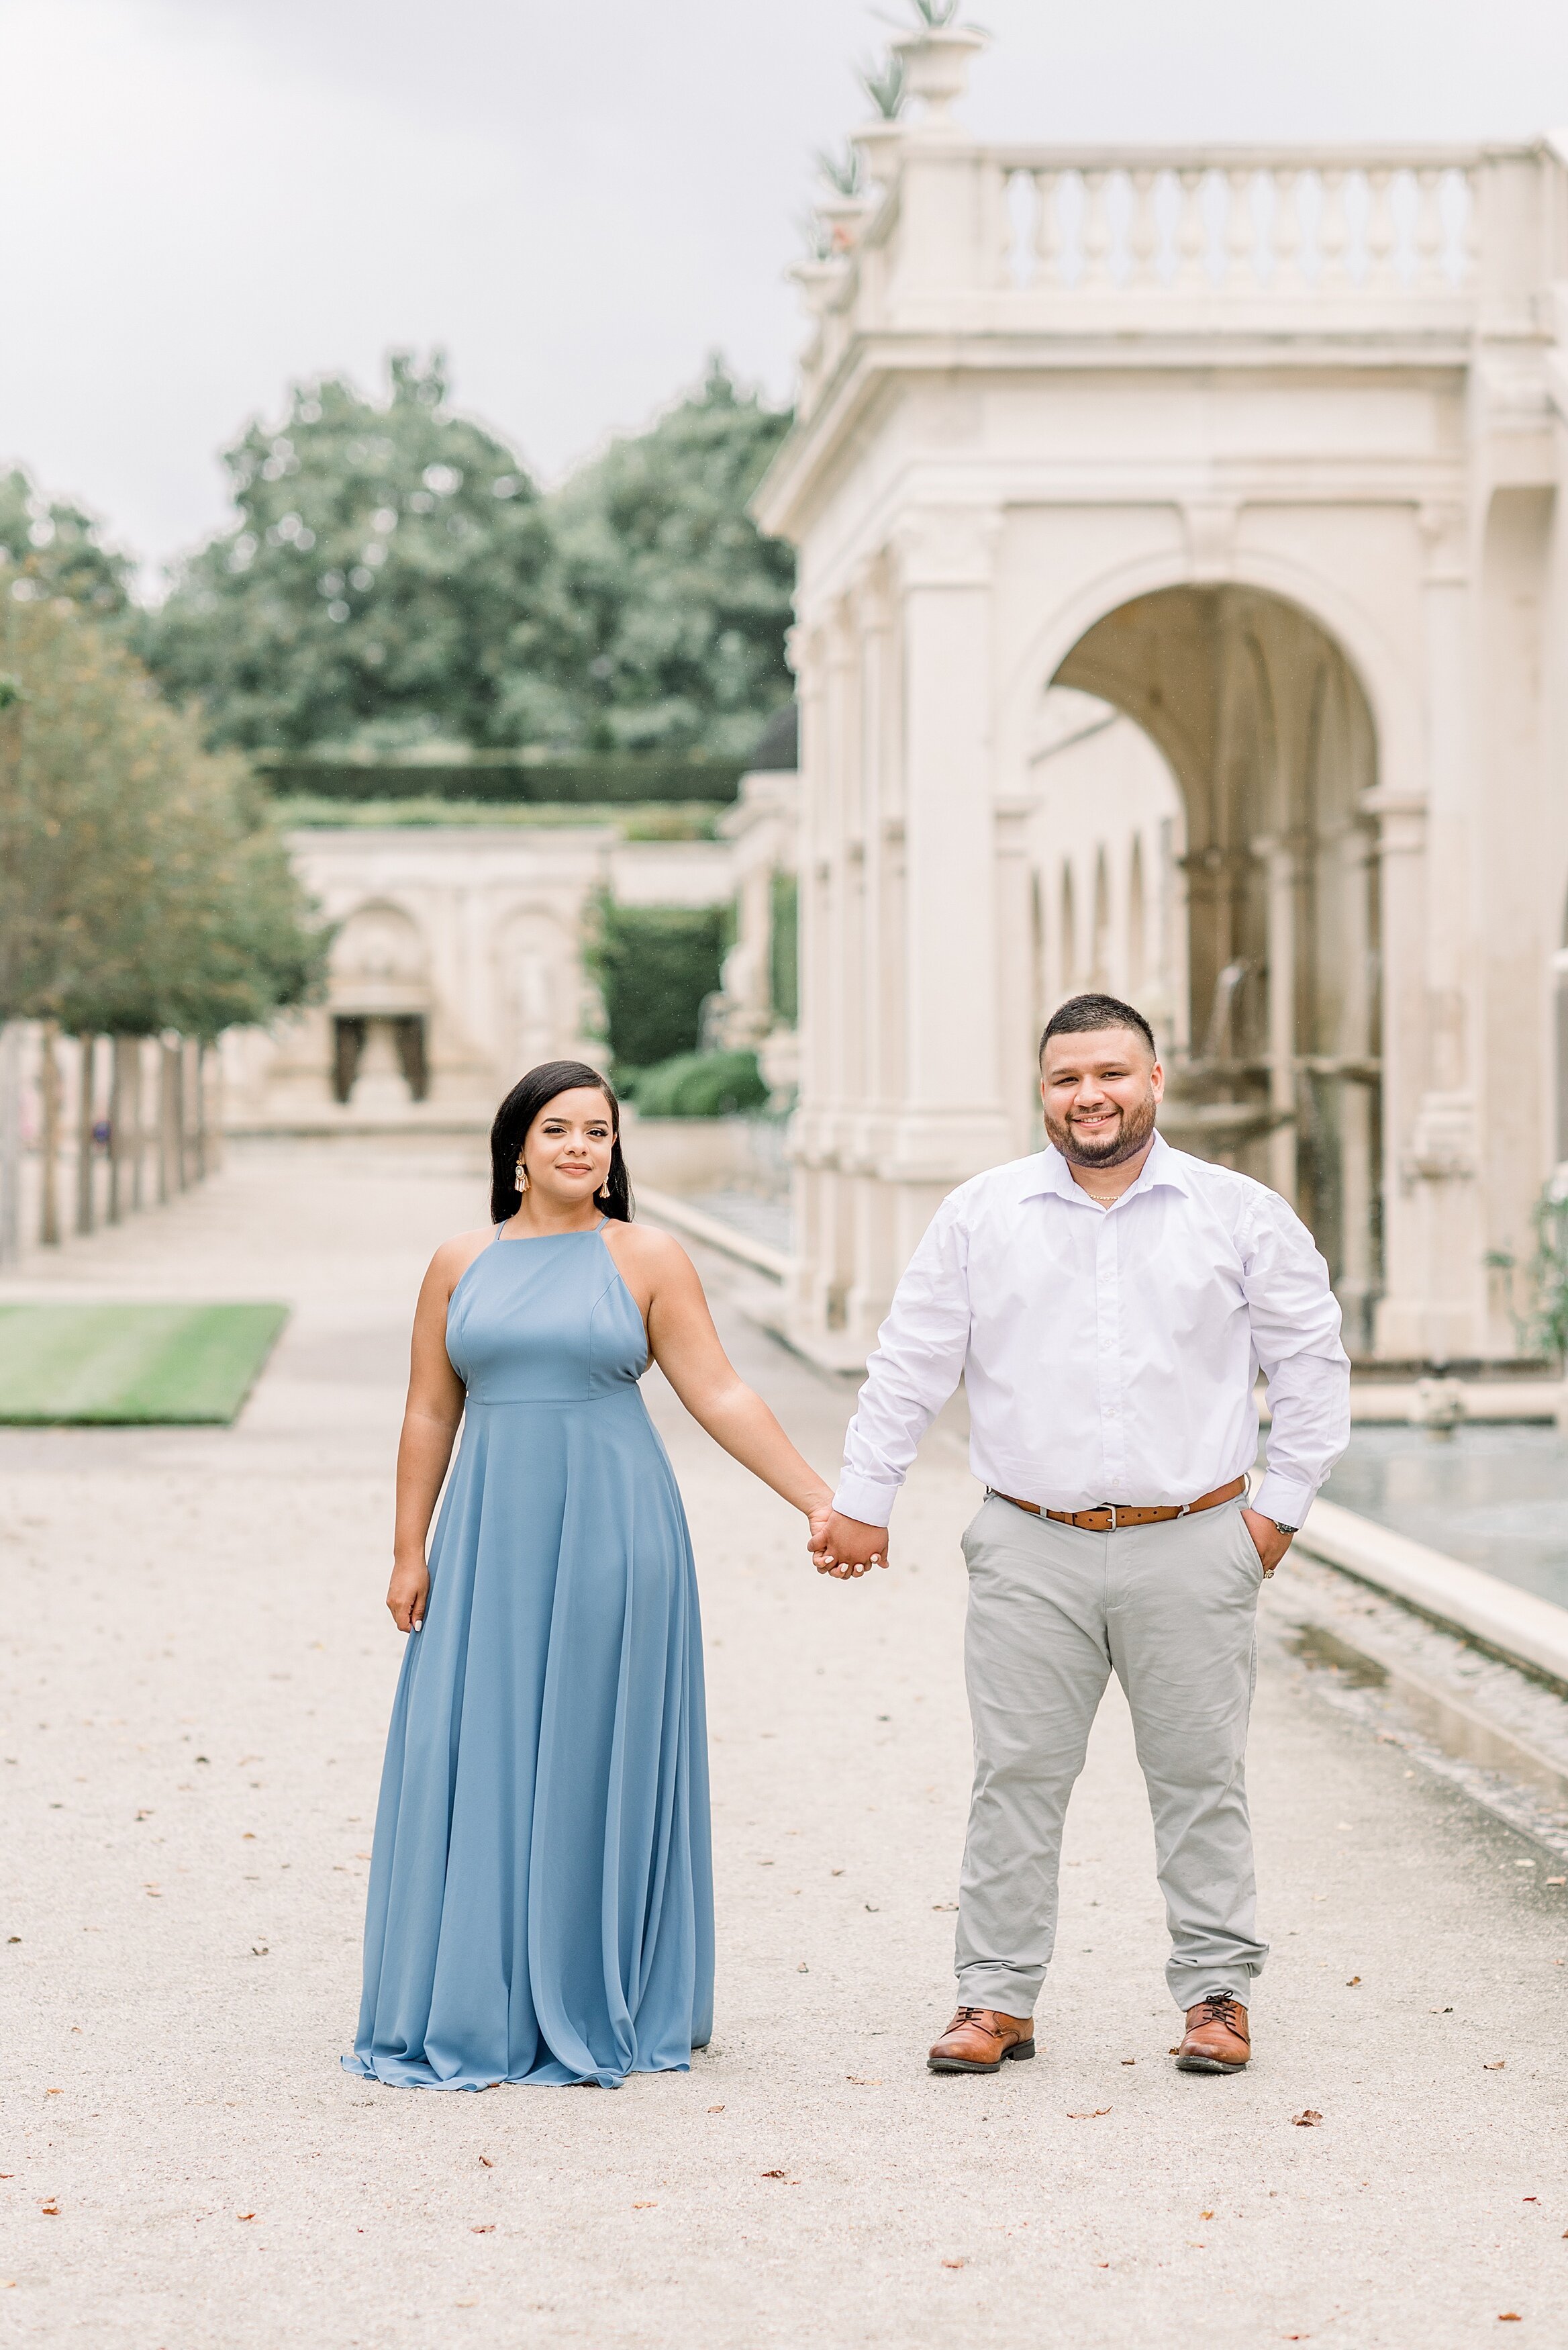 Longwood Gardens Kennet Square Pa Summer Engagement Session Photography_7661.jpg